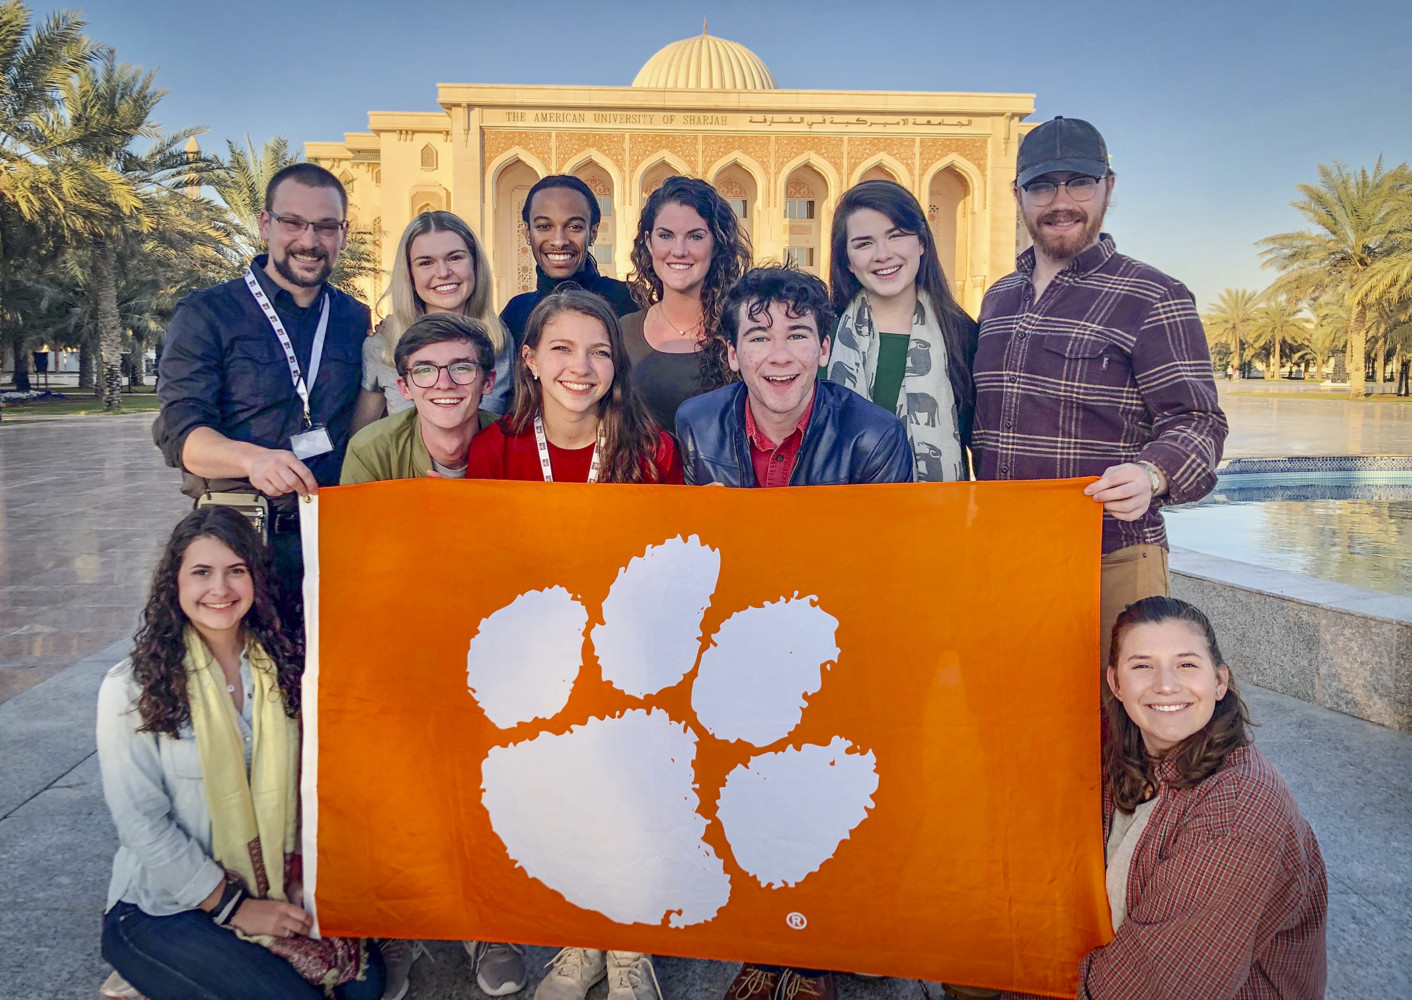 Ten people stand in a group holding a large Clemson Tiger paw flag, with a Middle Eastern-style building and palm trees behind them